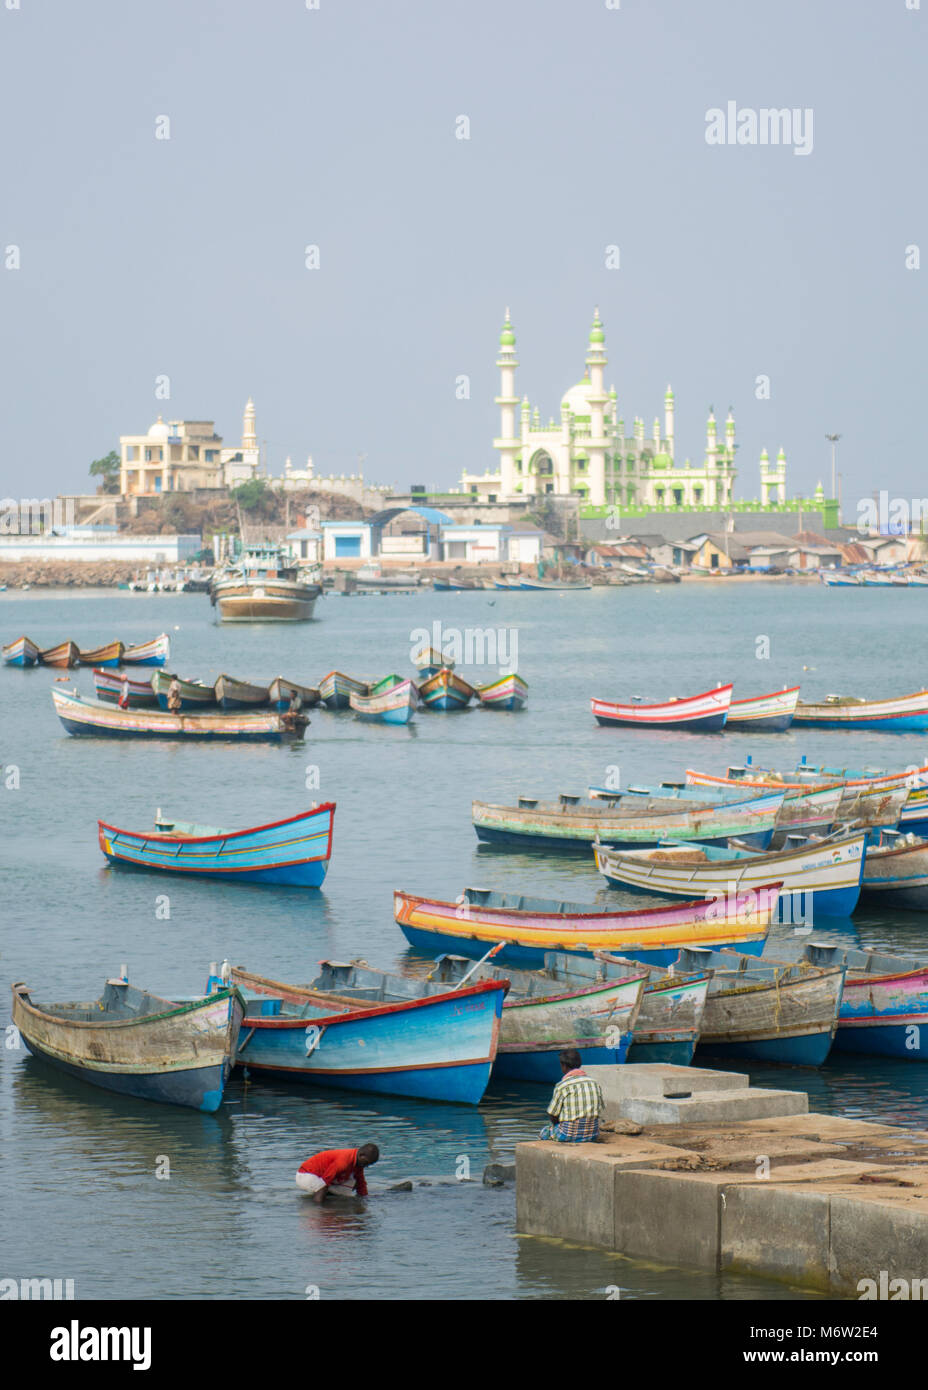 Colourful painted fishing boats with fishermen in foreground and mosque in the background in Vizhinjam Fishing Village Port, Kerala, India Stock Photo